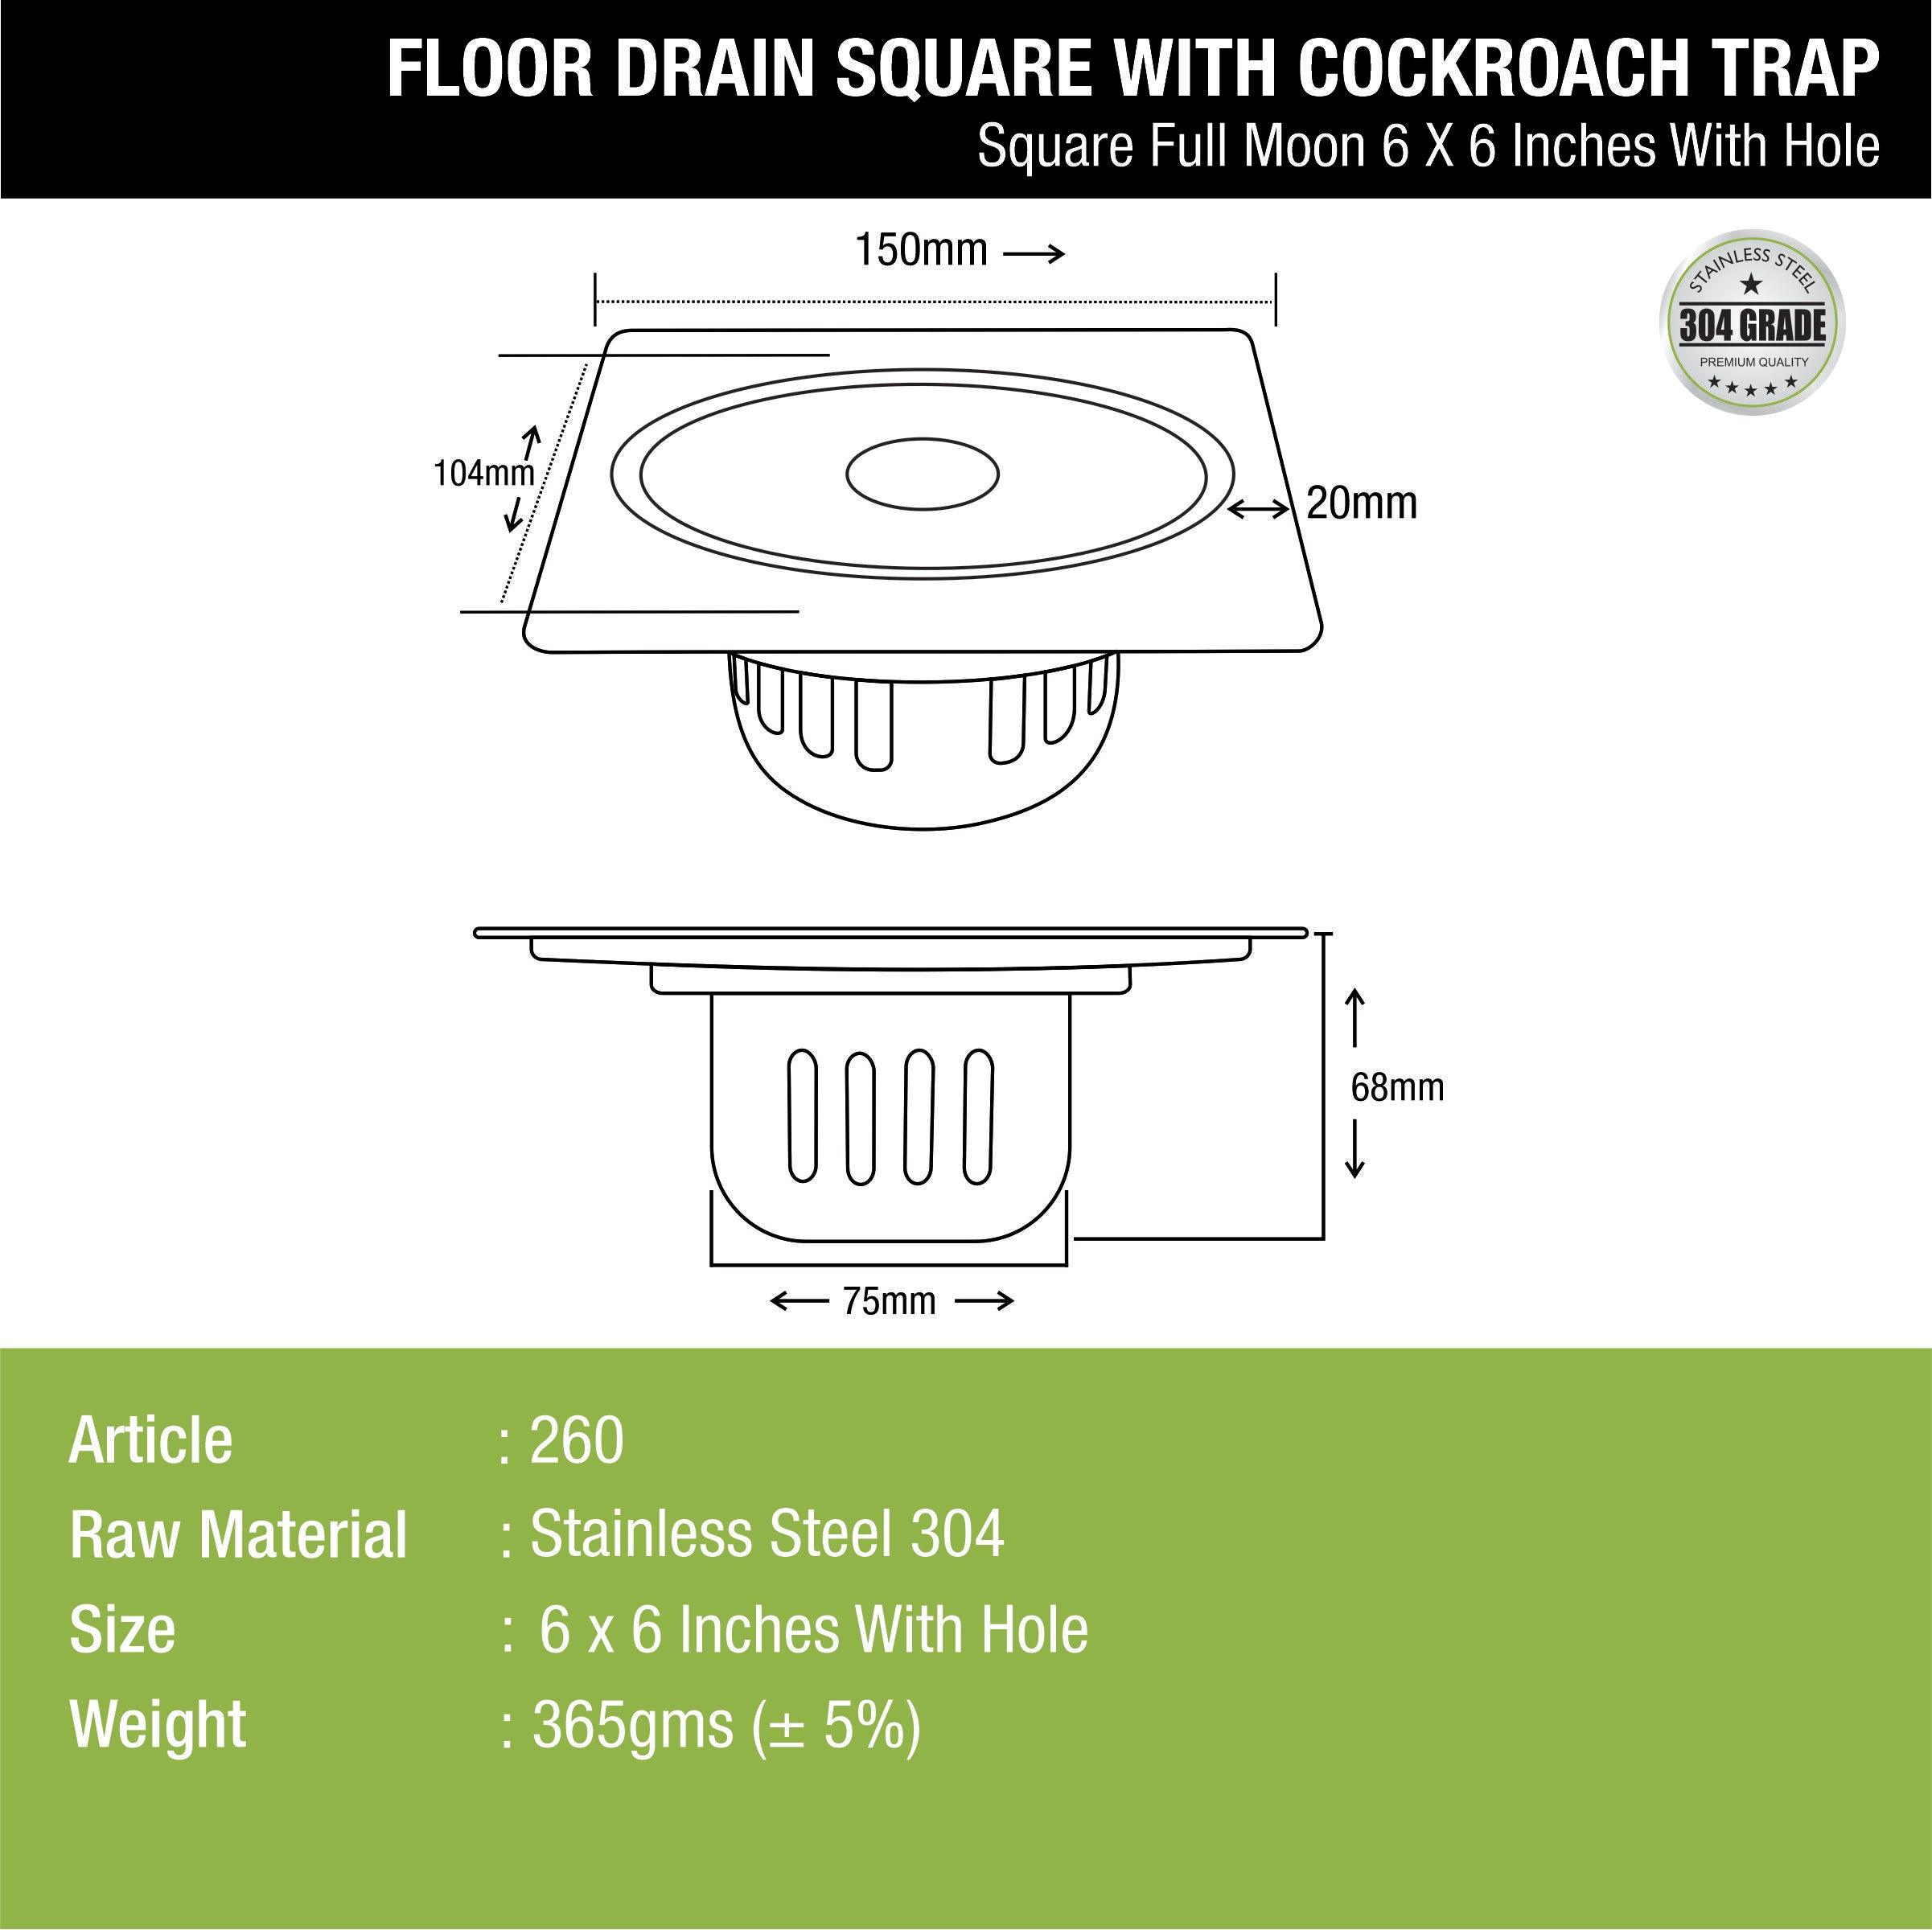 Full Moon Square Floor Drain (6 x 6 Inches) with Hole and Cockroach Trap - LIPKA - Lipka Home